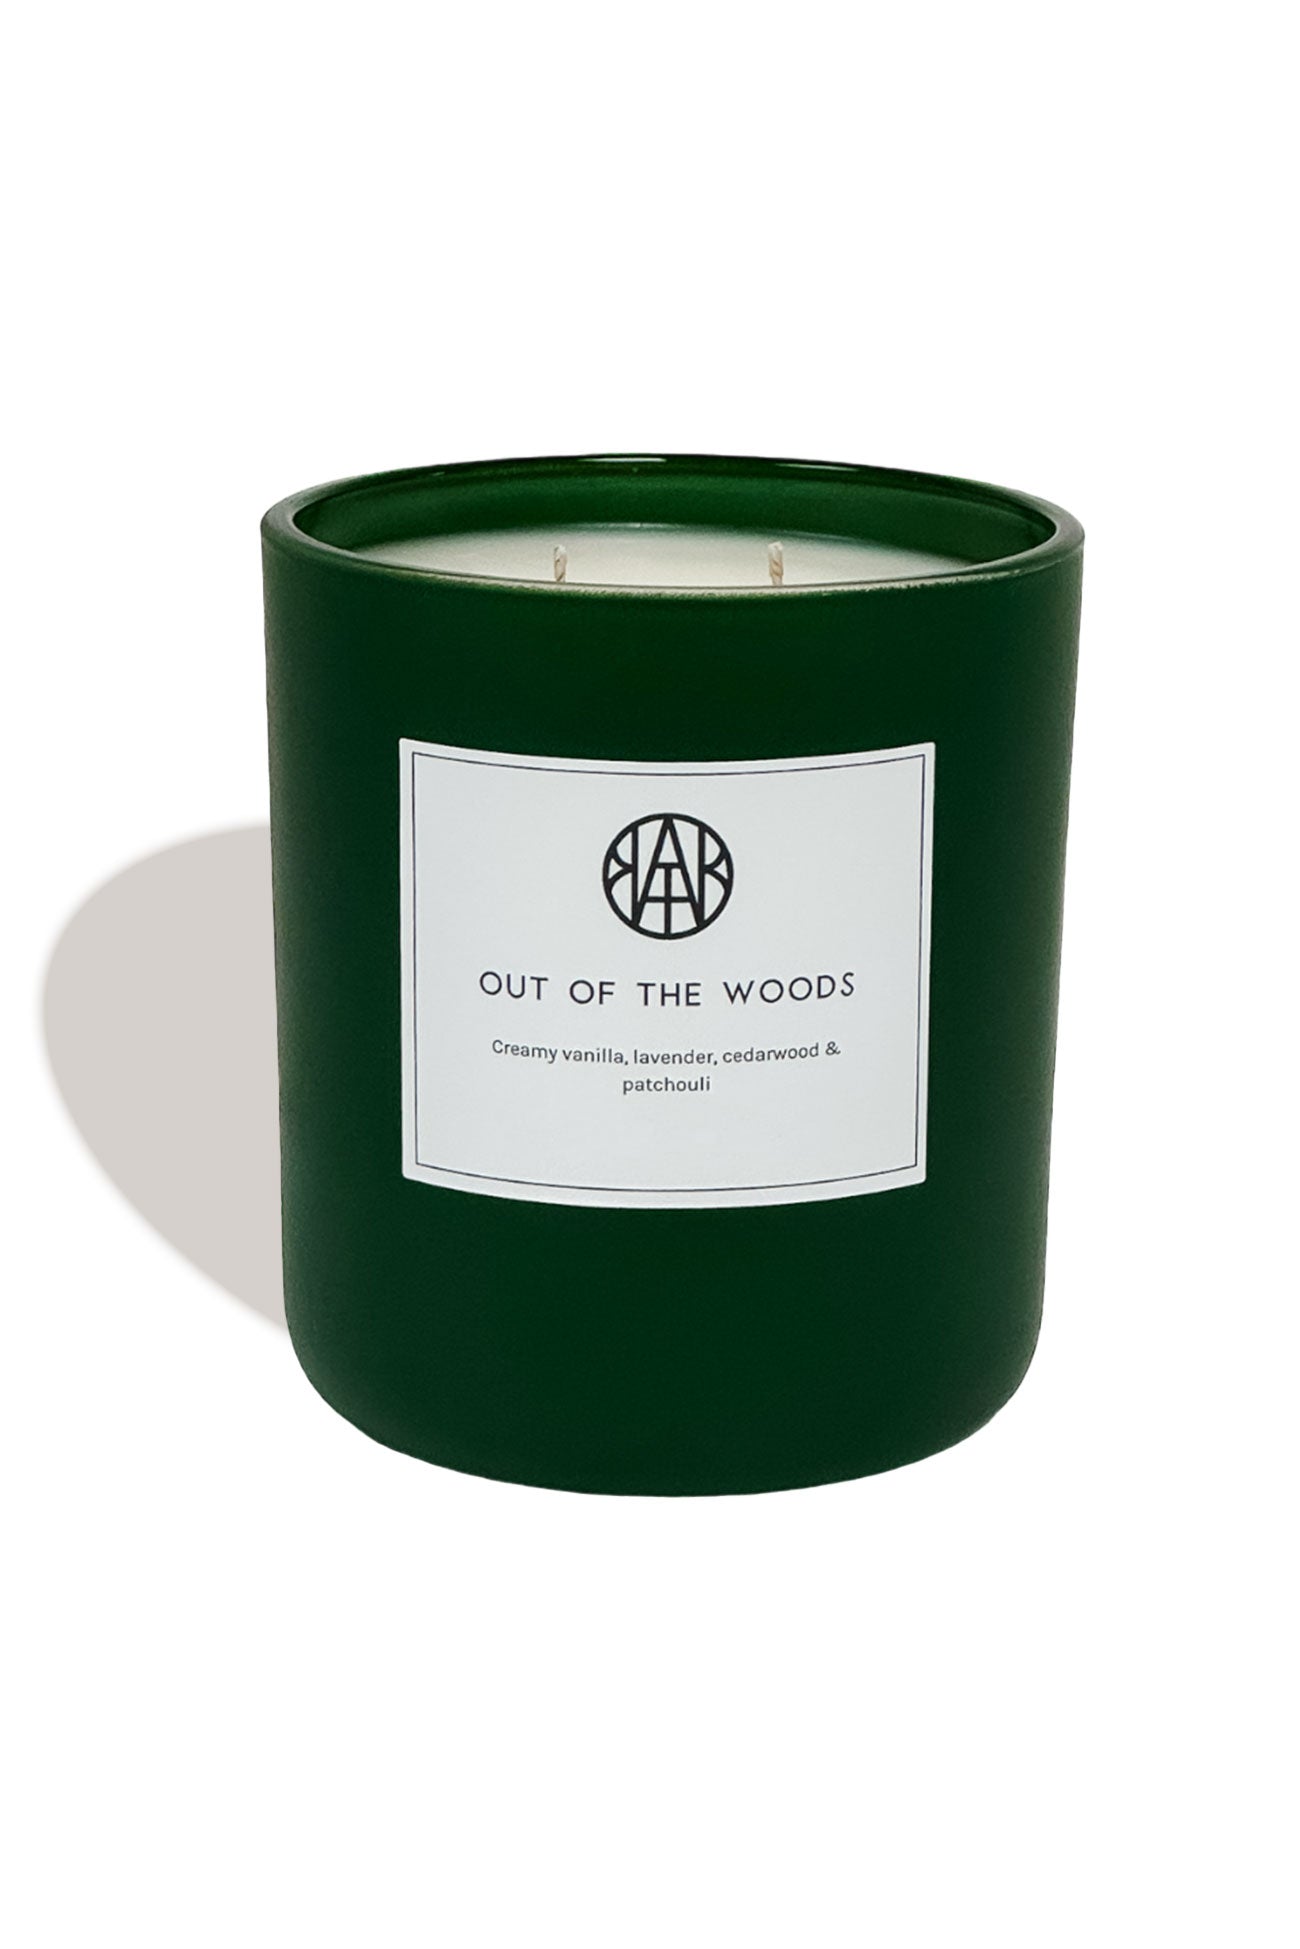 OUT OF THE WOODS - Deluxe Candle - AEMBR - Clean Luxury Candles, Wax Melts & Laundry Care